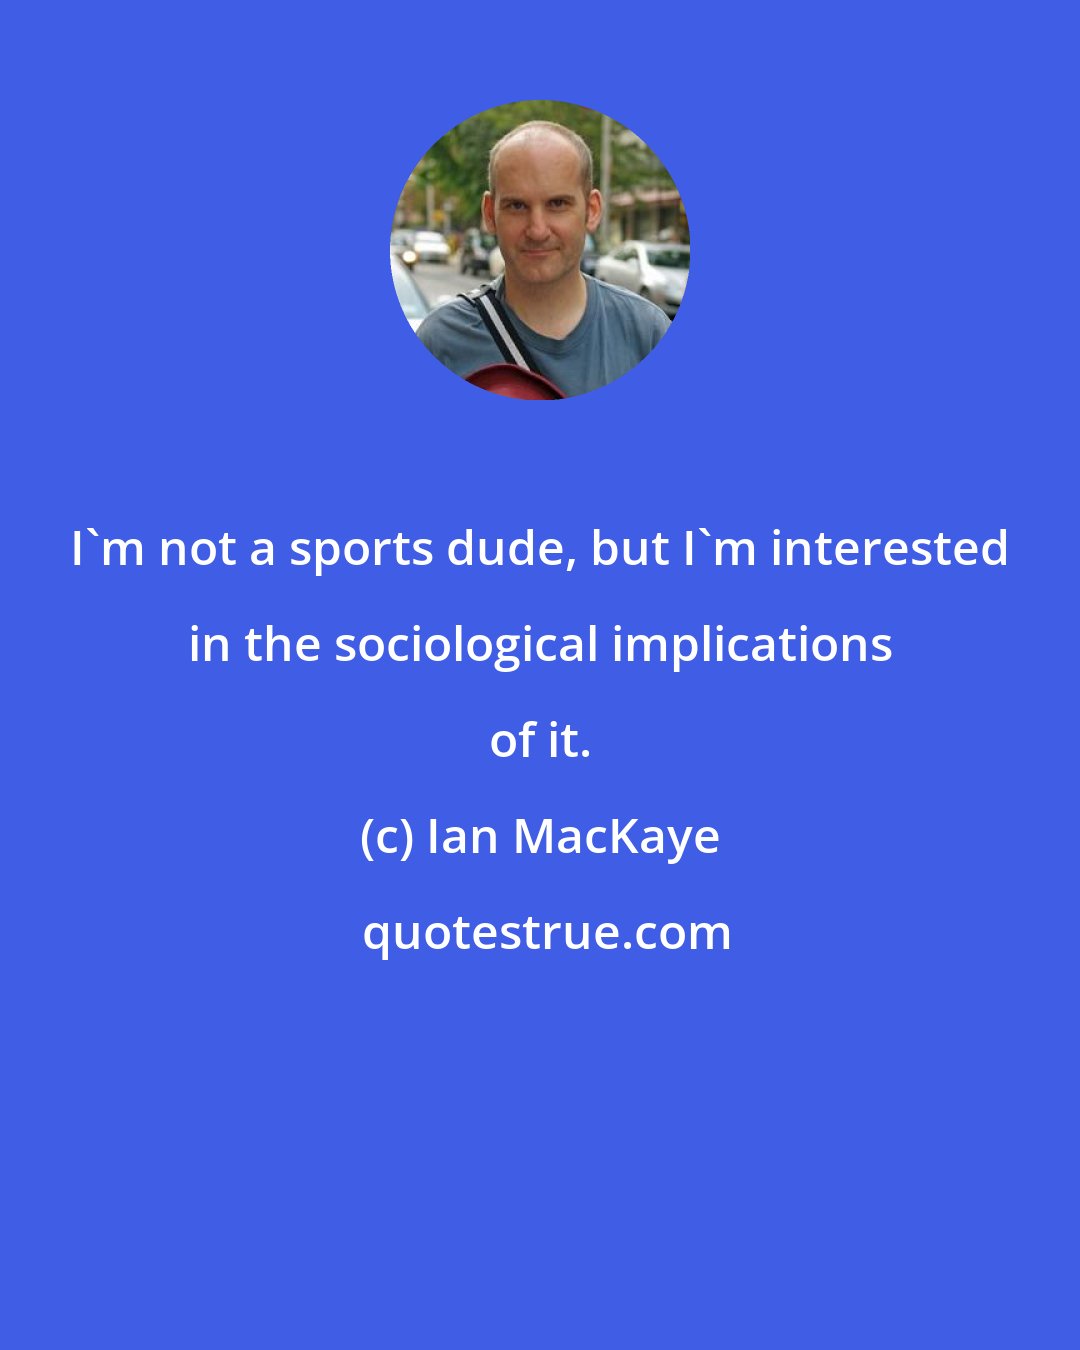 Ian MacKaye: I'm not a sports dude, but I'm interested in the sociological implications of it.